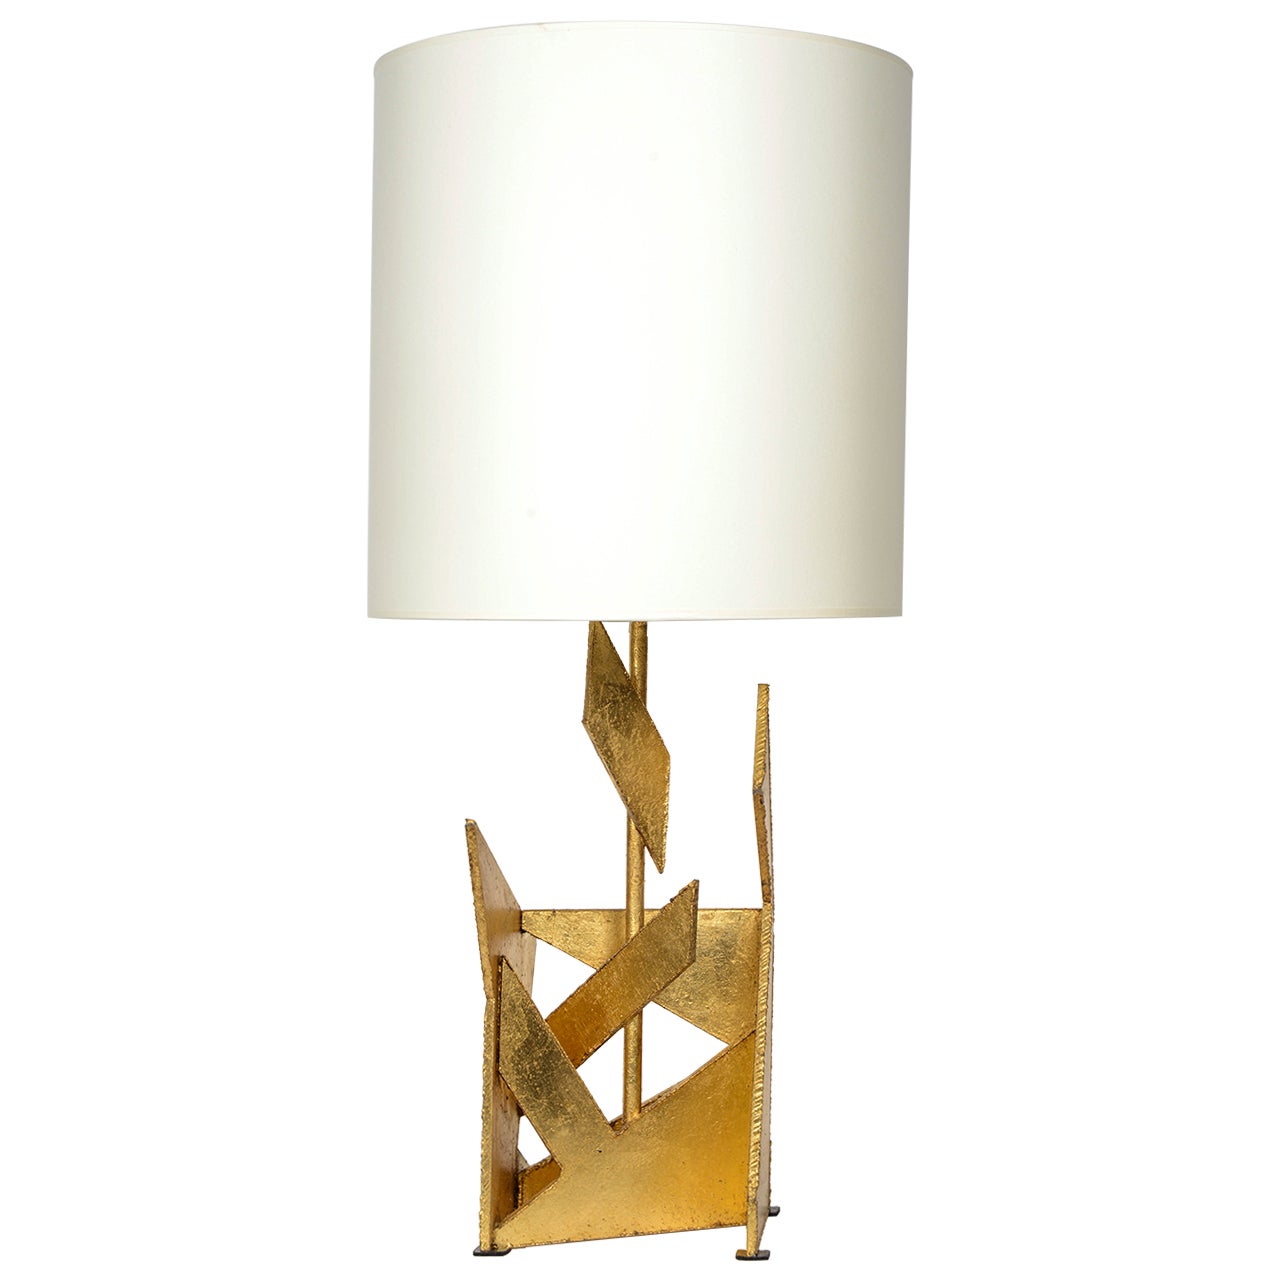 Pair of Asymmetrical Gold Painted Metal Lamps